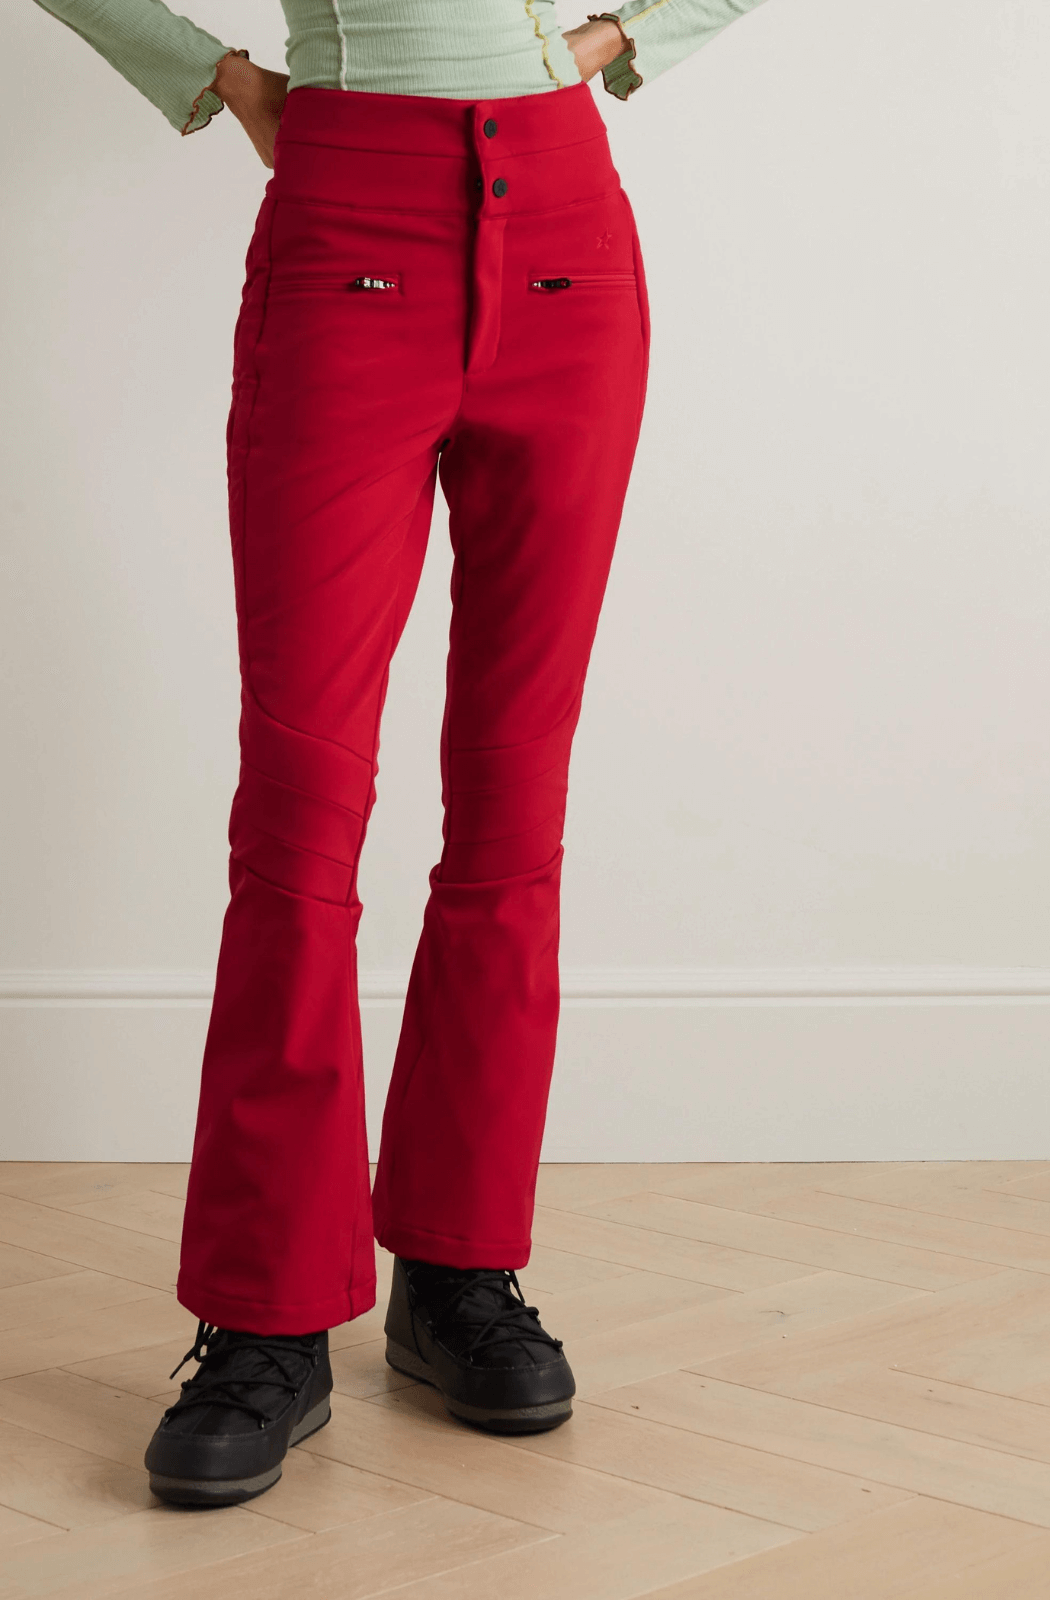 Perfect Moment Aurora Ski Trousers in Red with popper buttons and a high waist